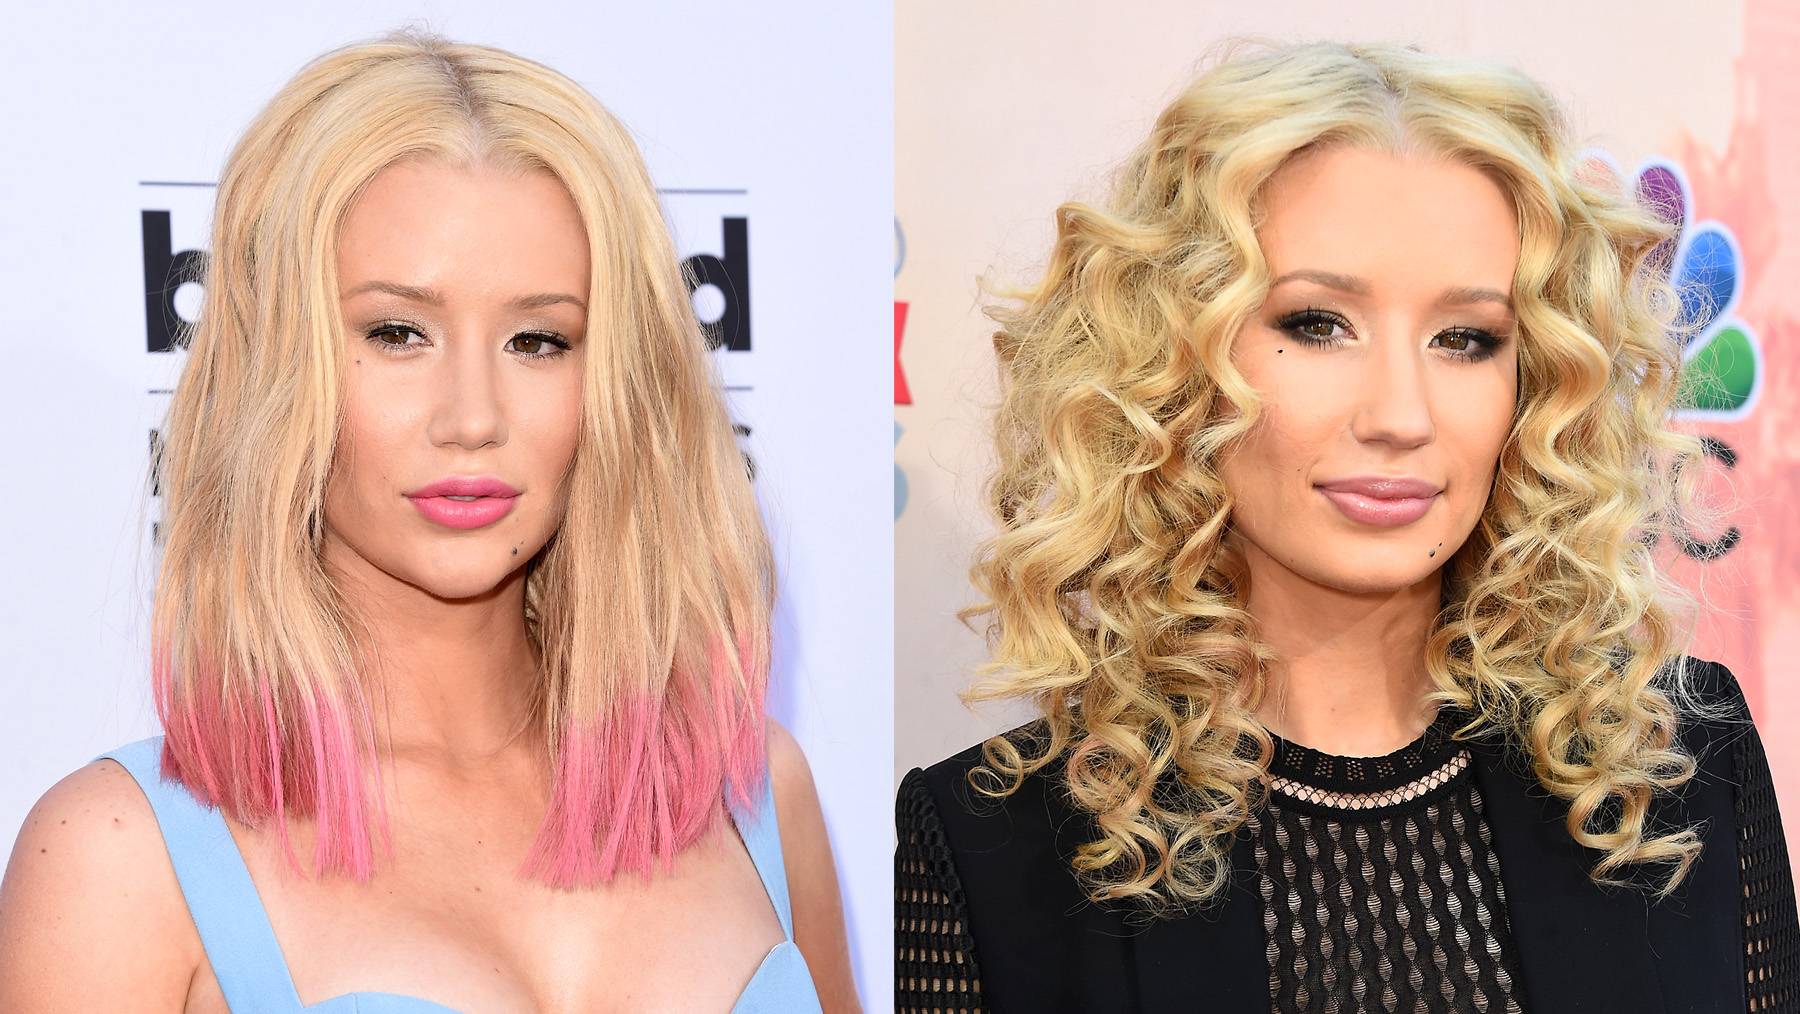 Iggy Azalea flashes her bum in see-through leggings - after denying she's  had implants to make it bigger